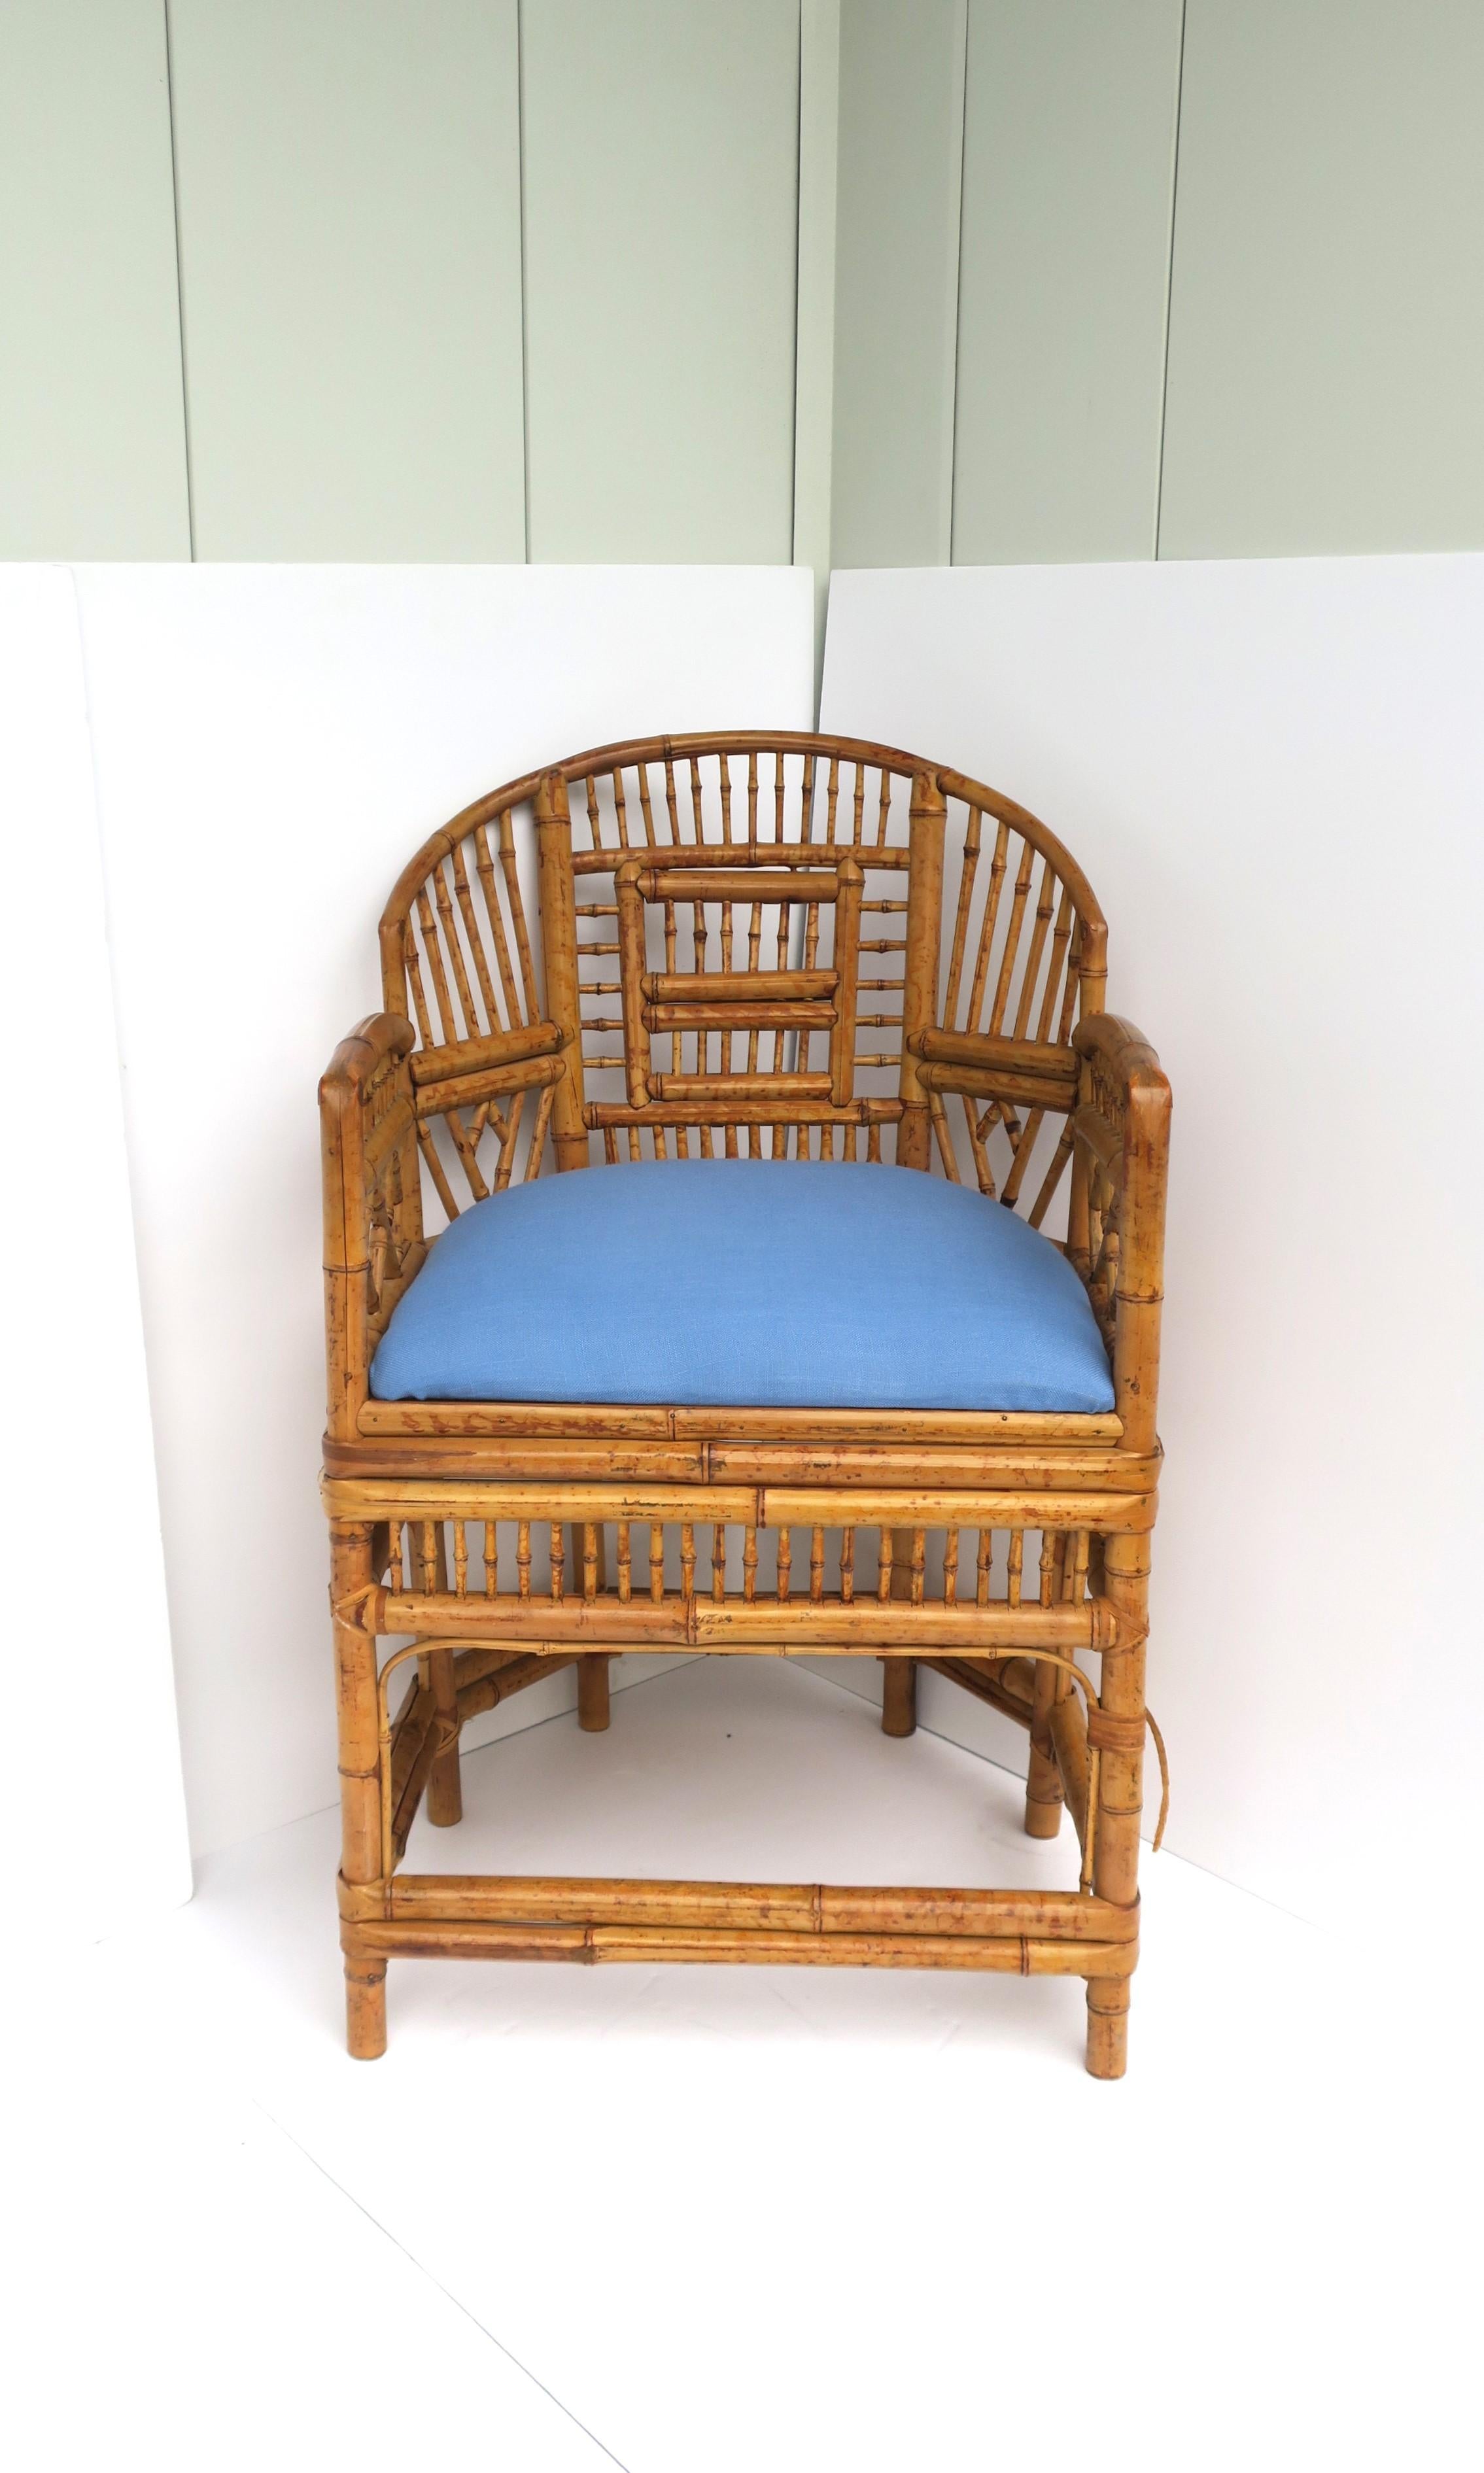 20th Century Wicker Bamboo Chair with Blue Upholstered Seat in the Chinoiserie Style For Sale